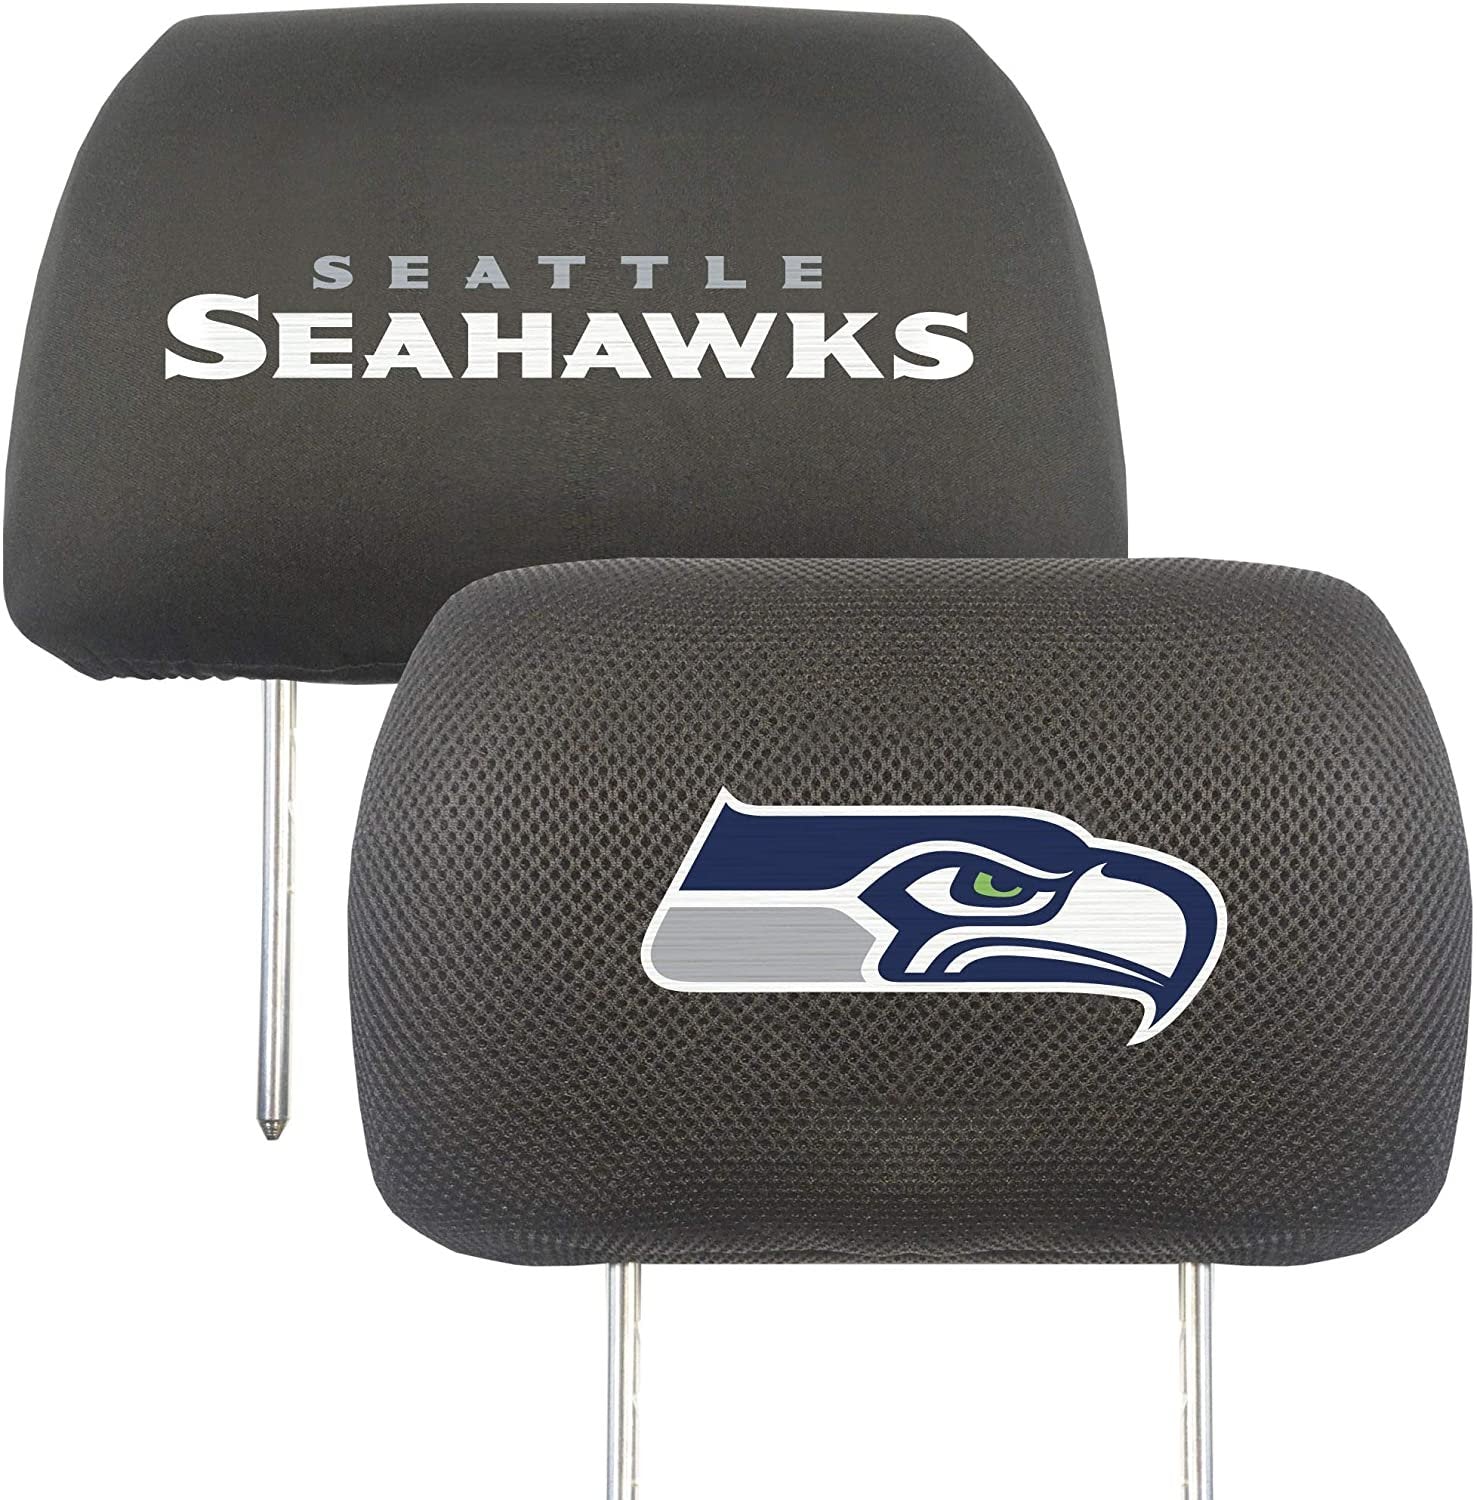 Seattle Seahawks Pair of Premium Auto Head Rest Covers, Embroidered, Black Elastic, 14x10 Inch